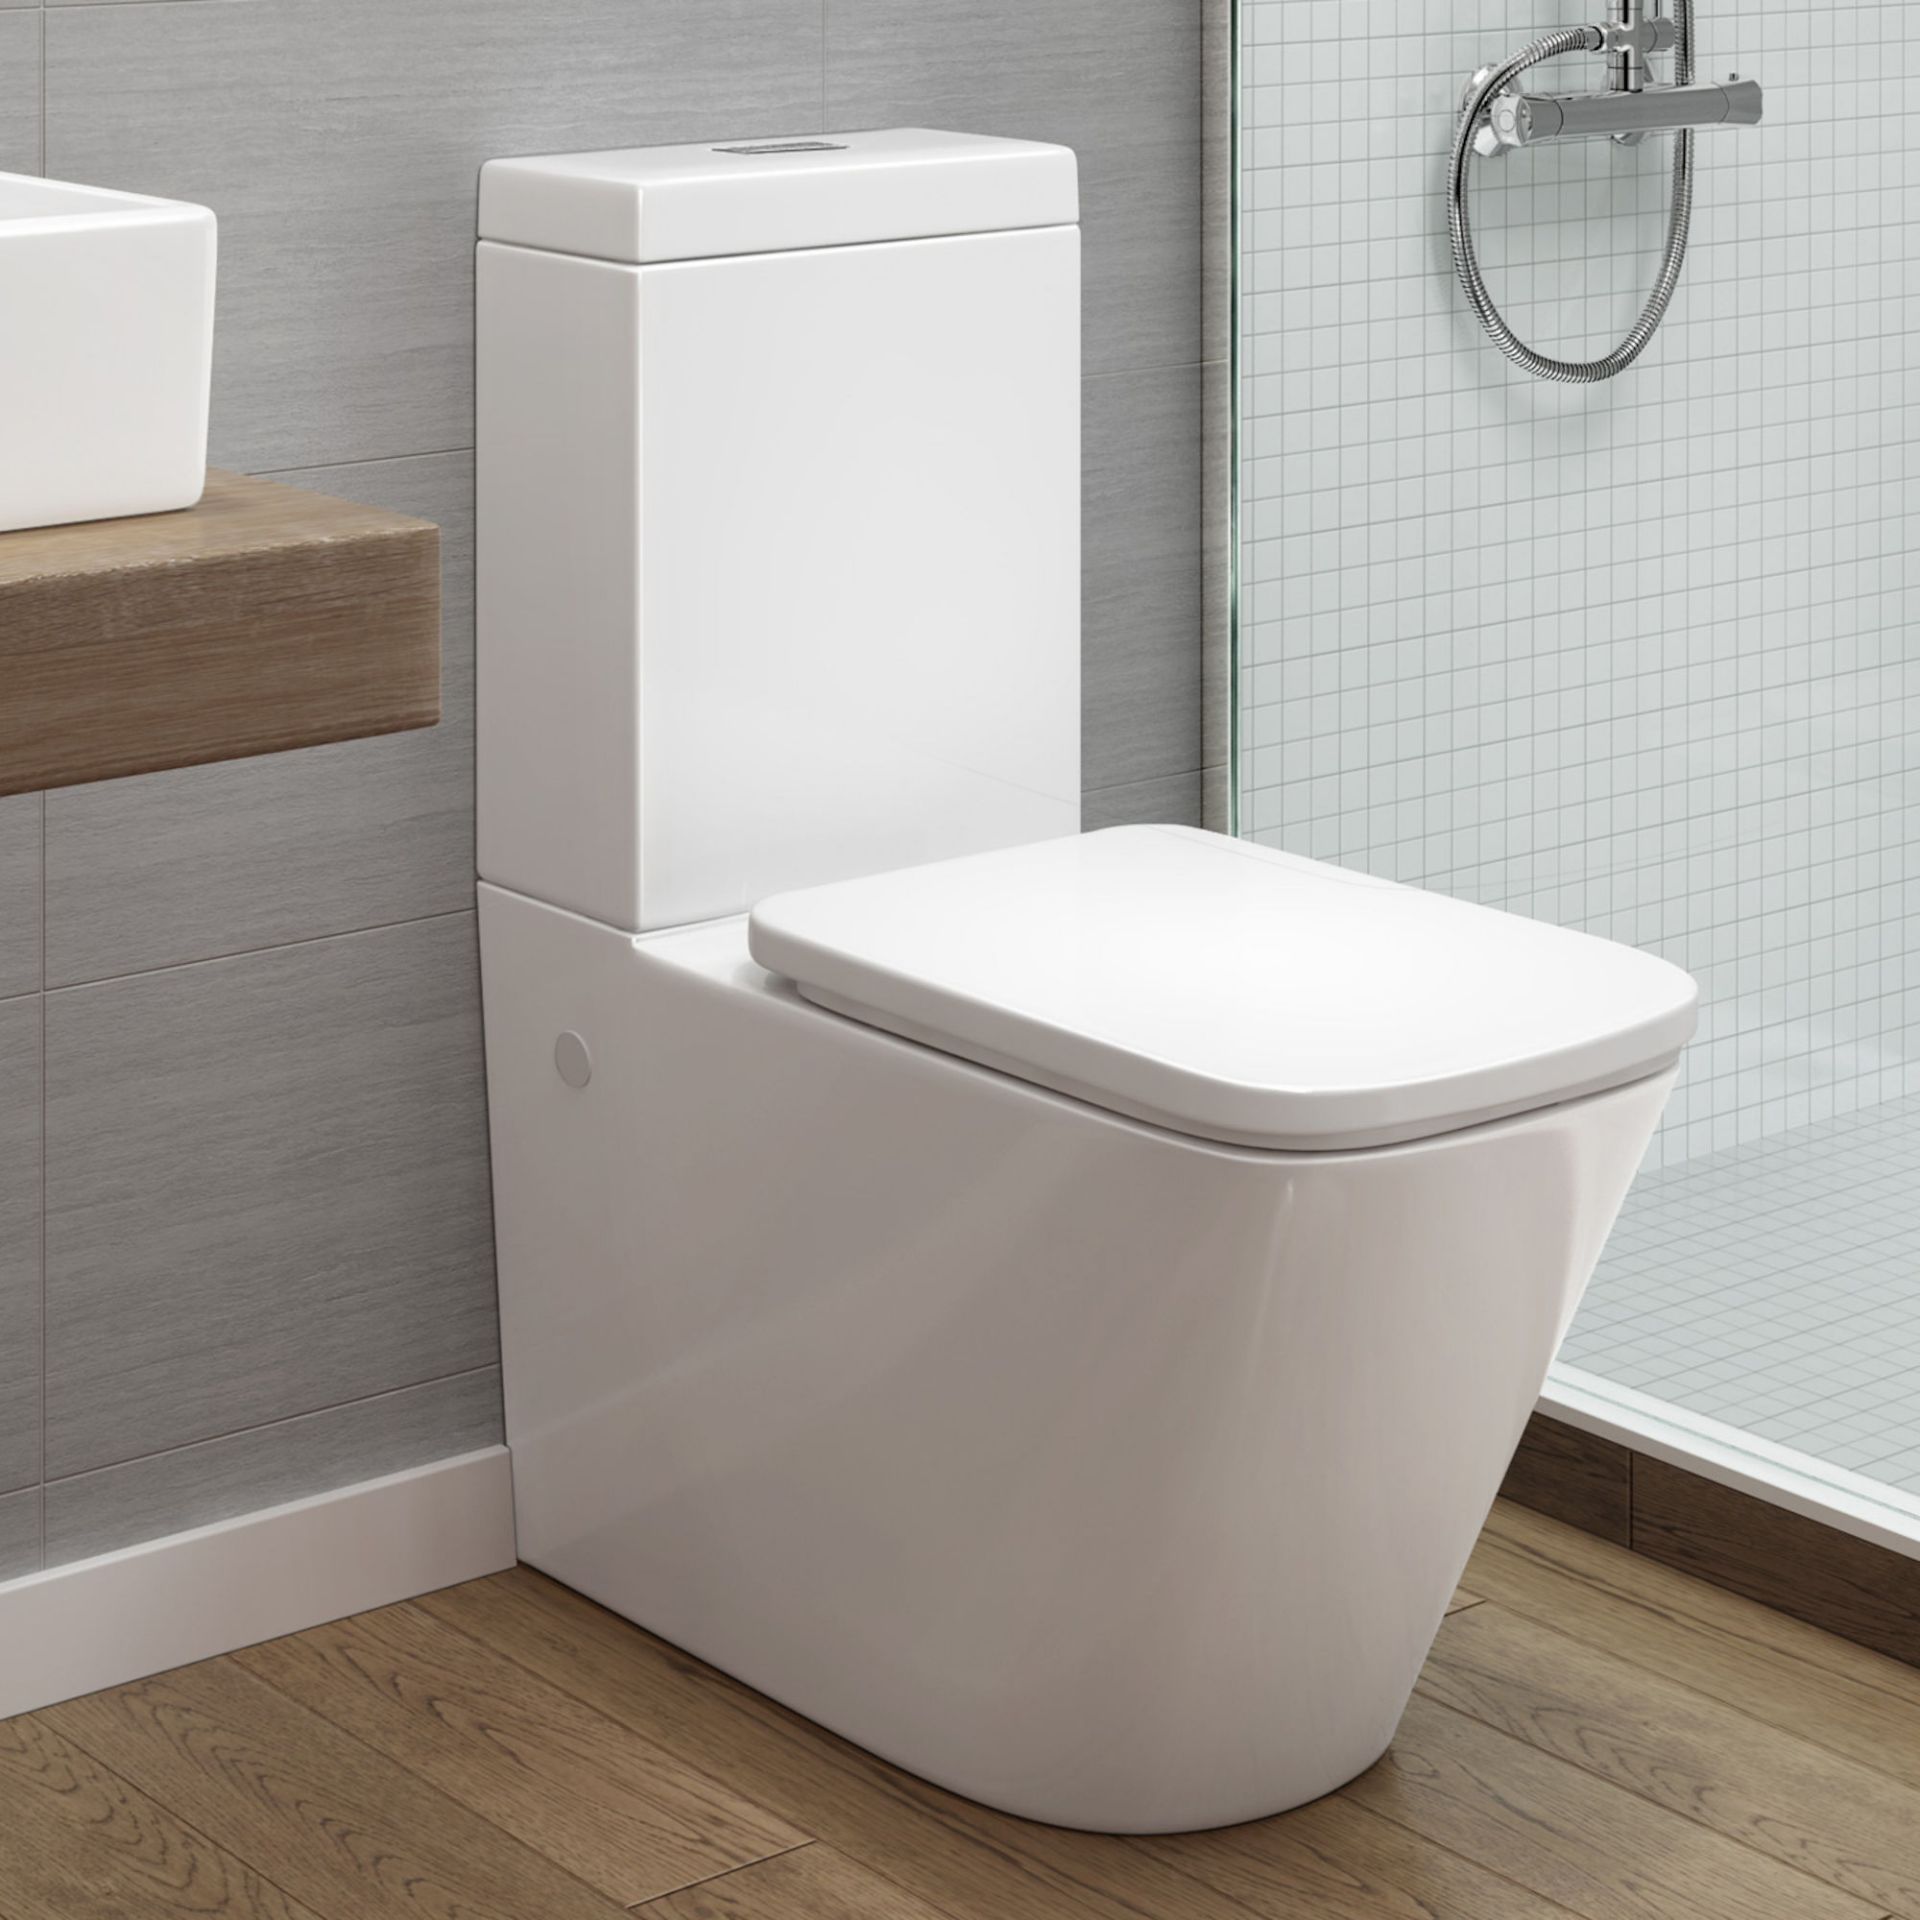 (XM83) Florence Close Coupled Toilet & Cistern inc Soft Close Seat Contemporary design finished in a - Image 3 of 4